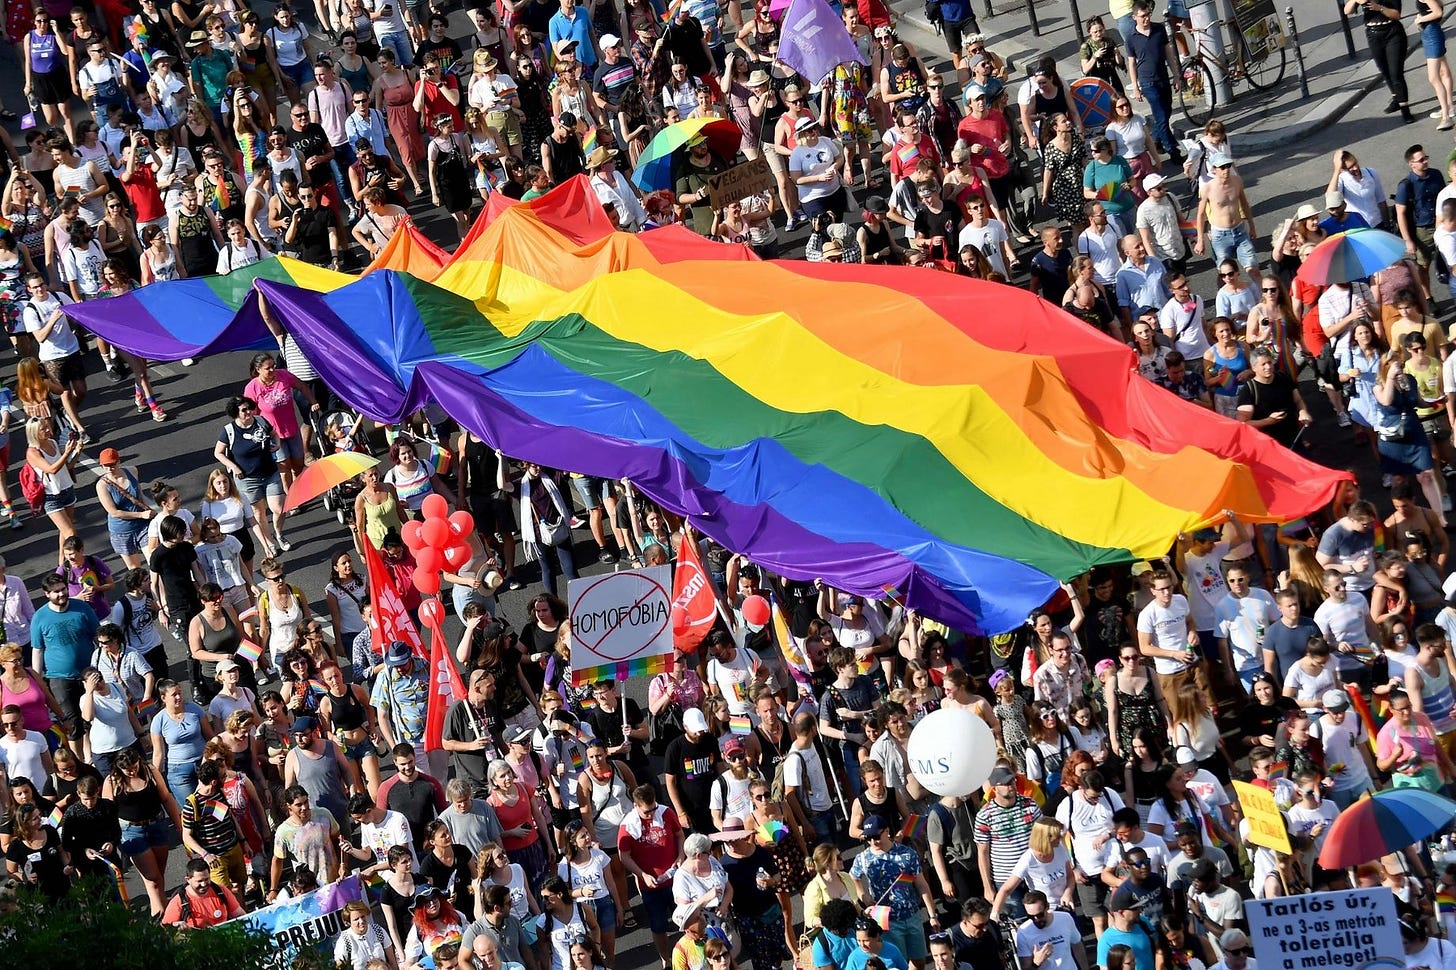 Thousands hit the streets for 'biggest and most diverse' Pride parade celebrating LGBT rights ...